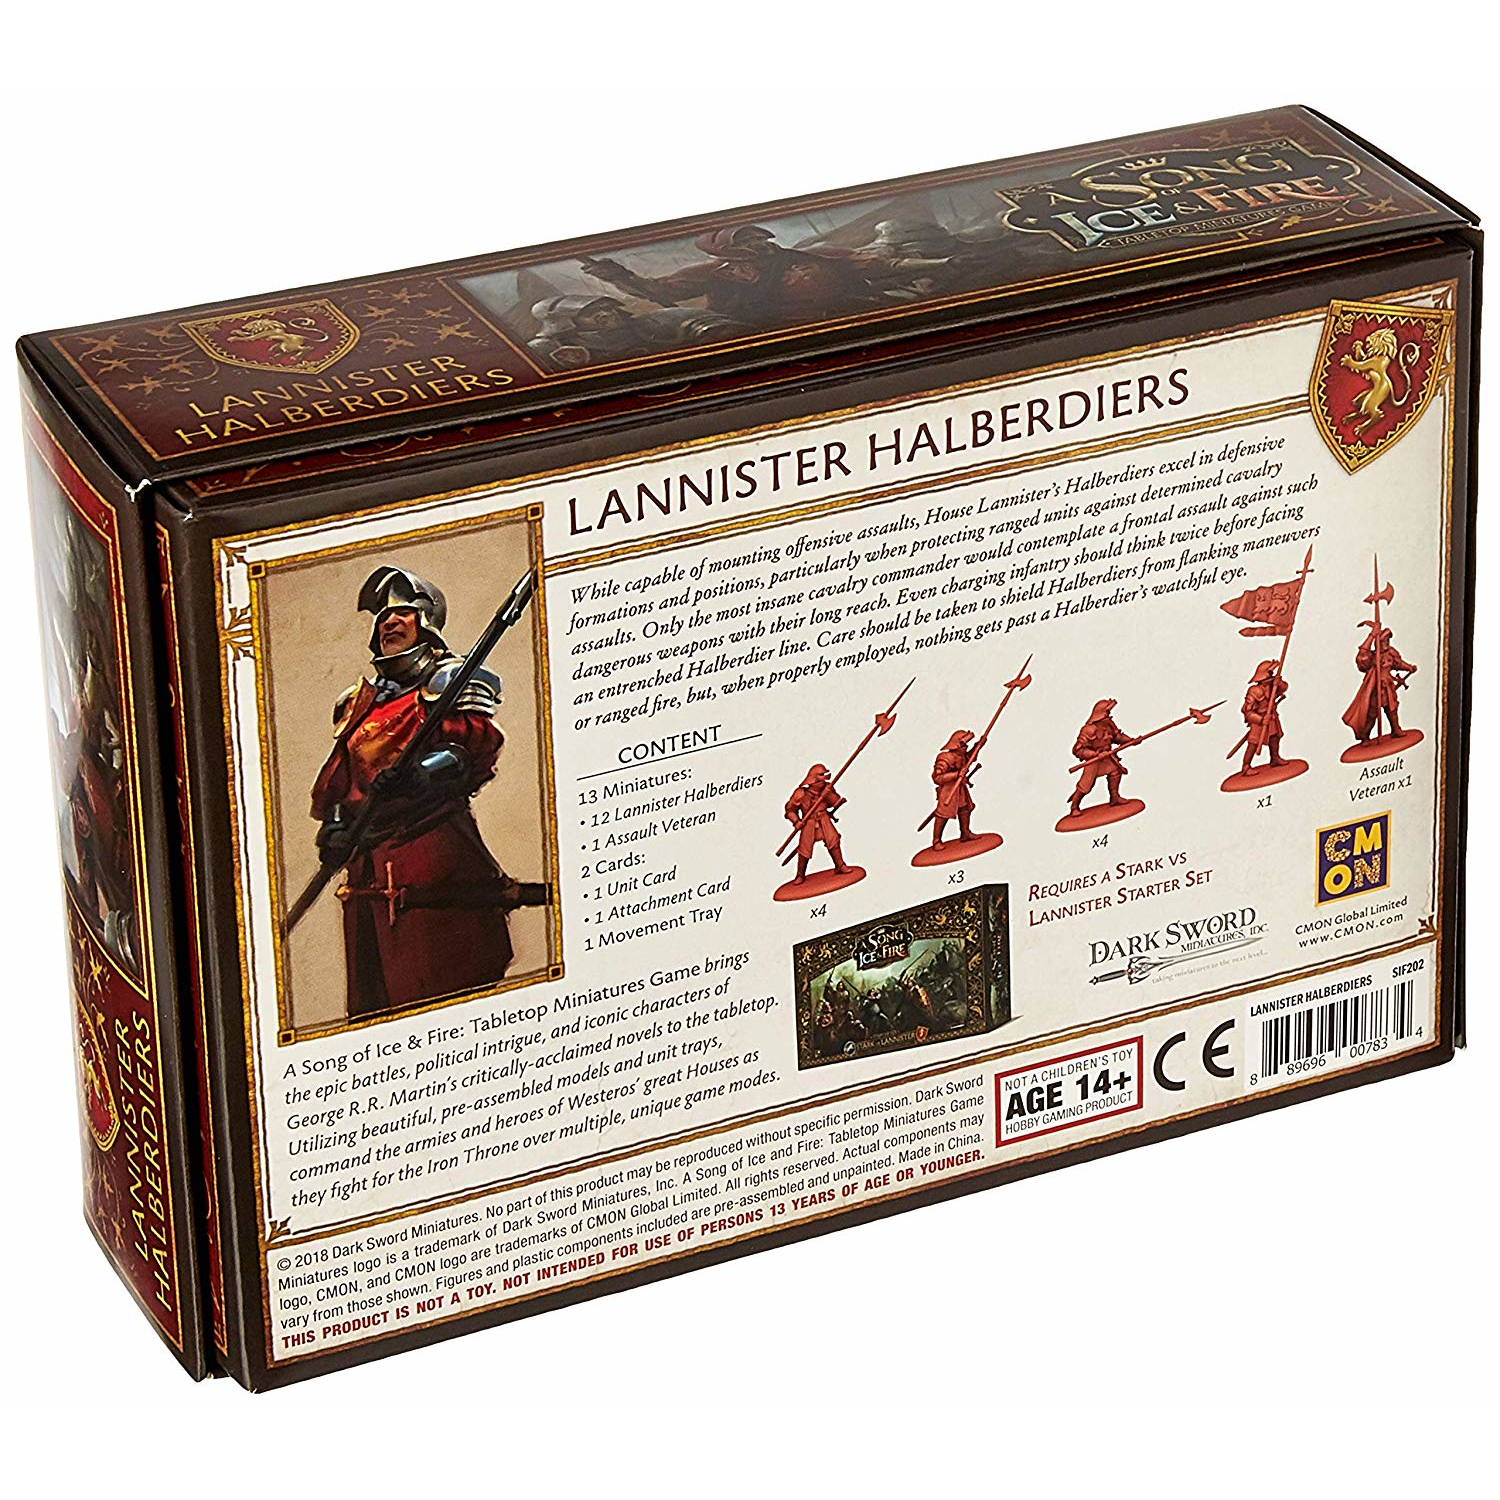 A Song of Ice & Fire: Tabletop Miniatures Game Lannister Halberdiers Unit Box, by CMON - image 2 of 8